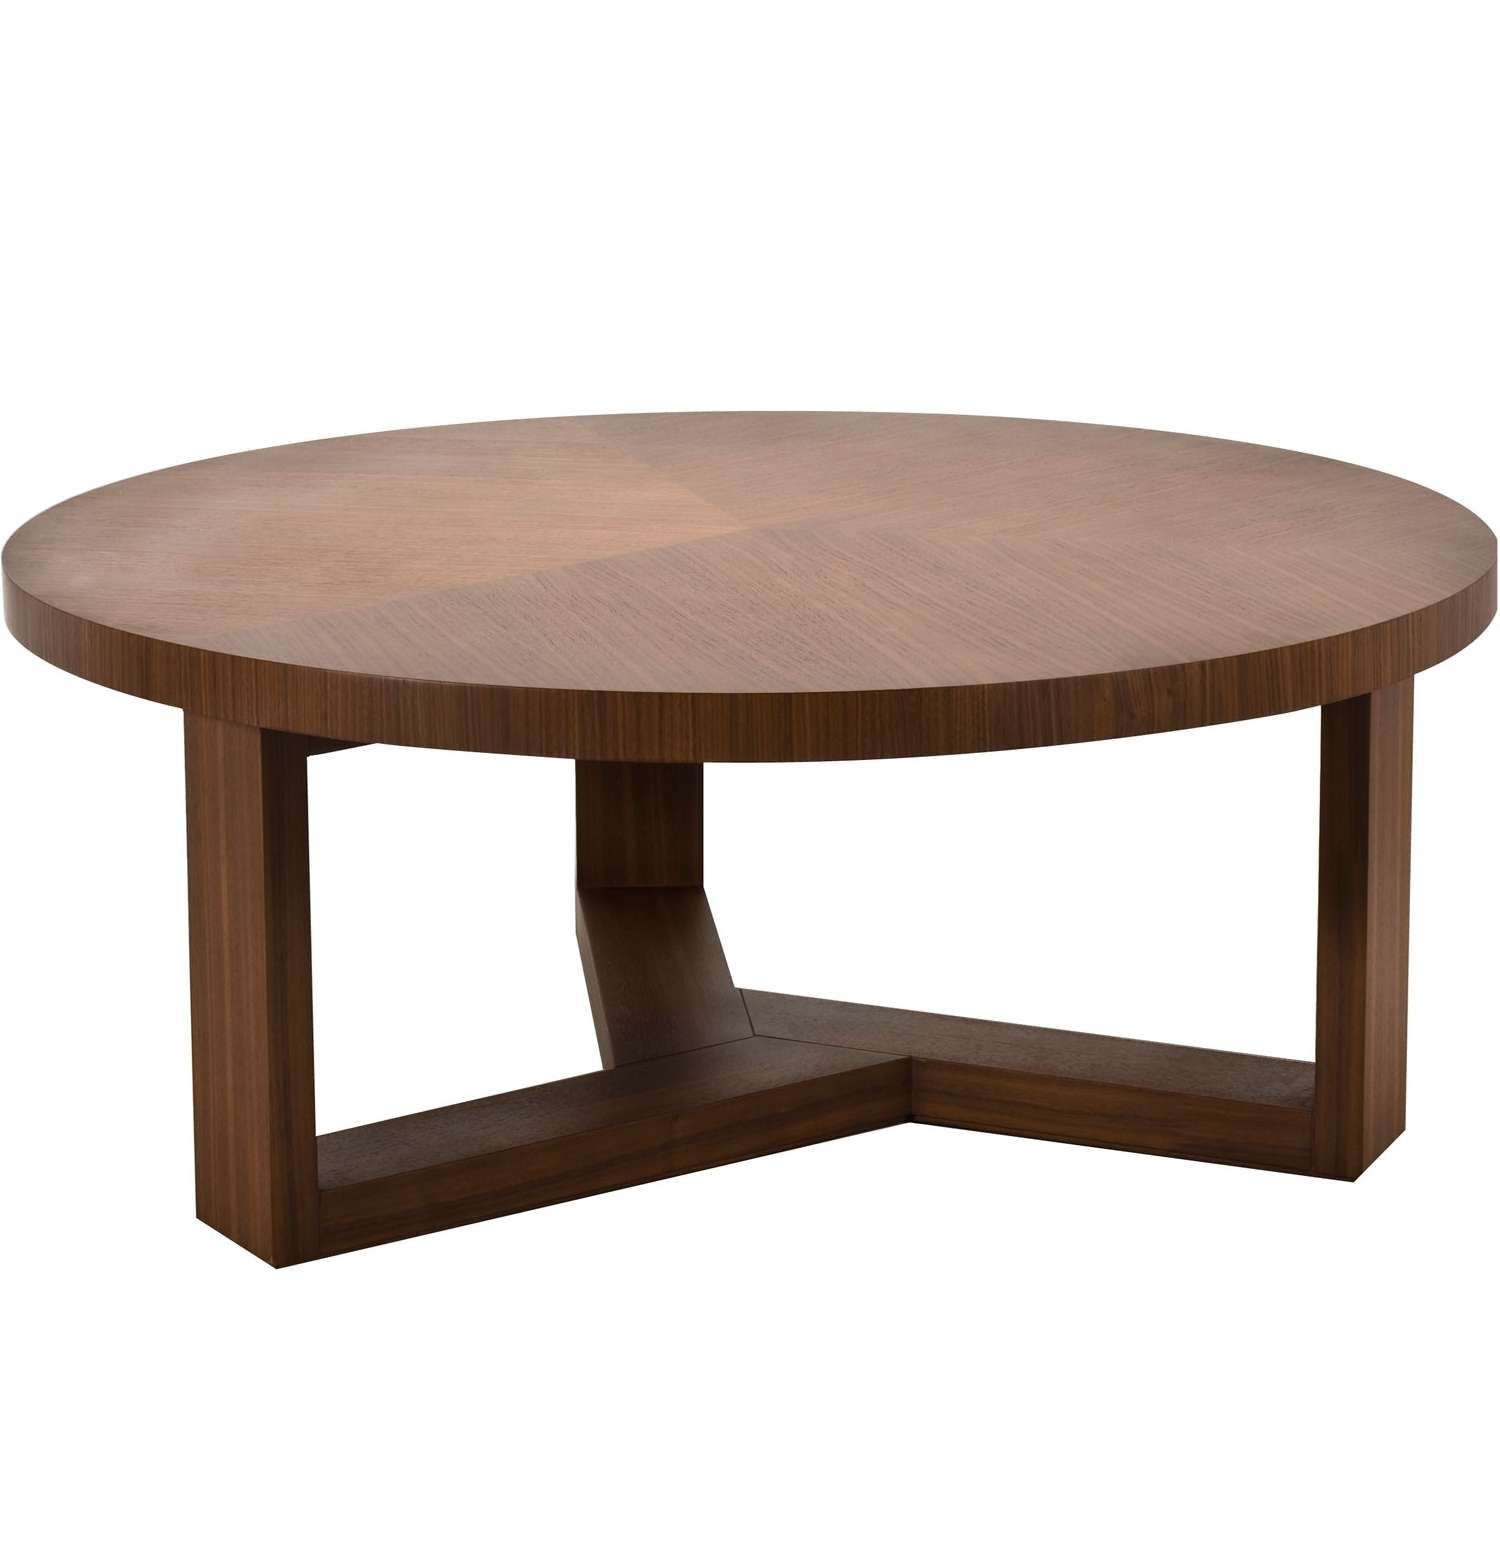 Most Up To Date Circle Coffee Tables Throughout Coffee Tables : Circle Coffee Table Airwood Tables Furniture (View 5 of 20)